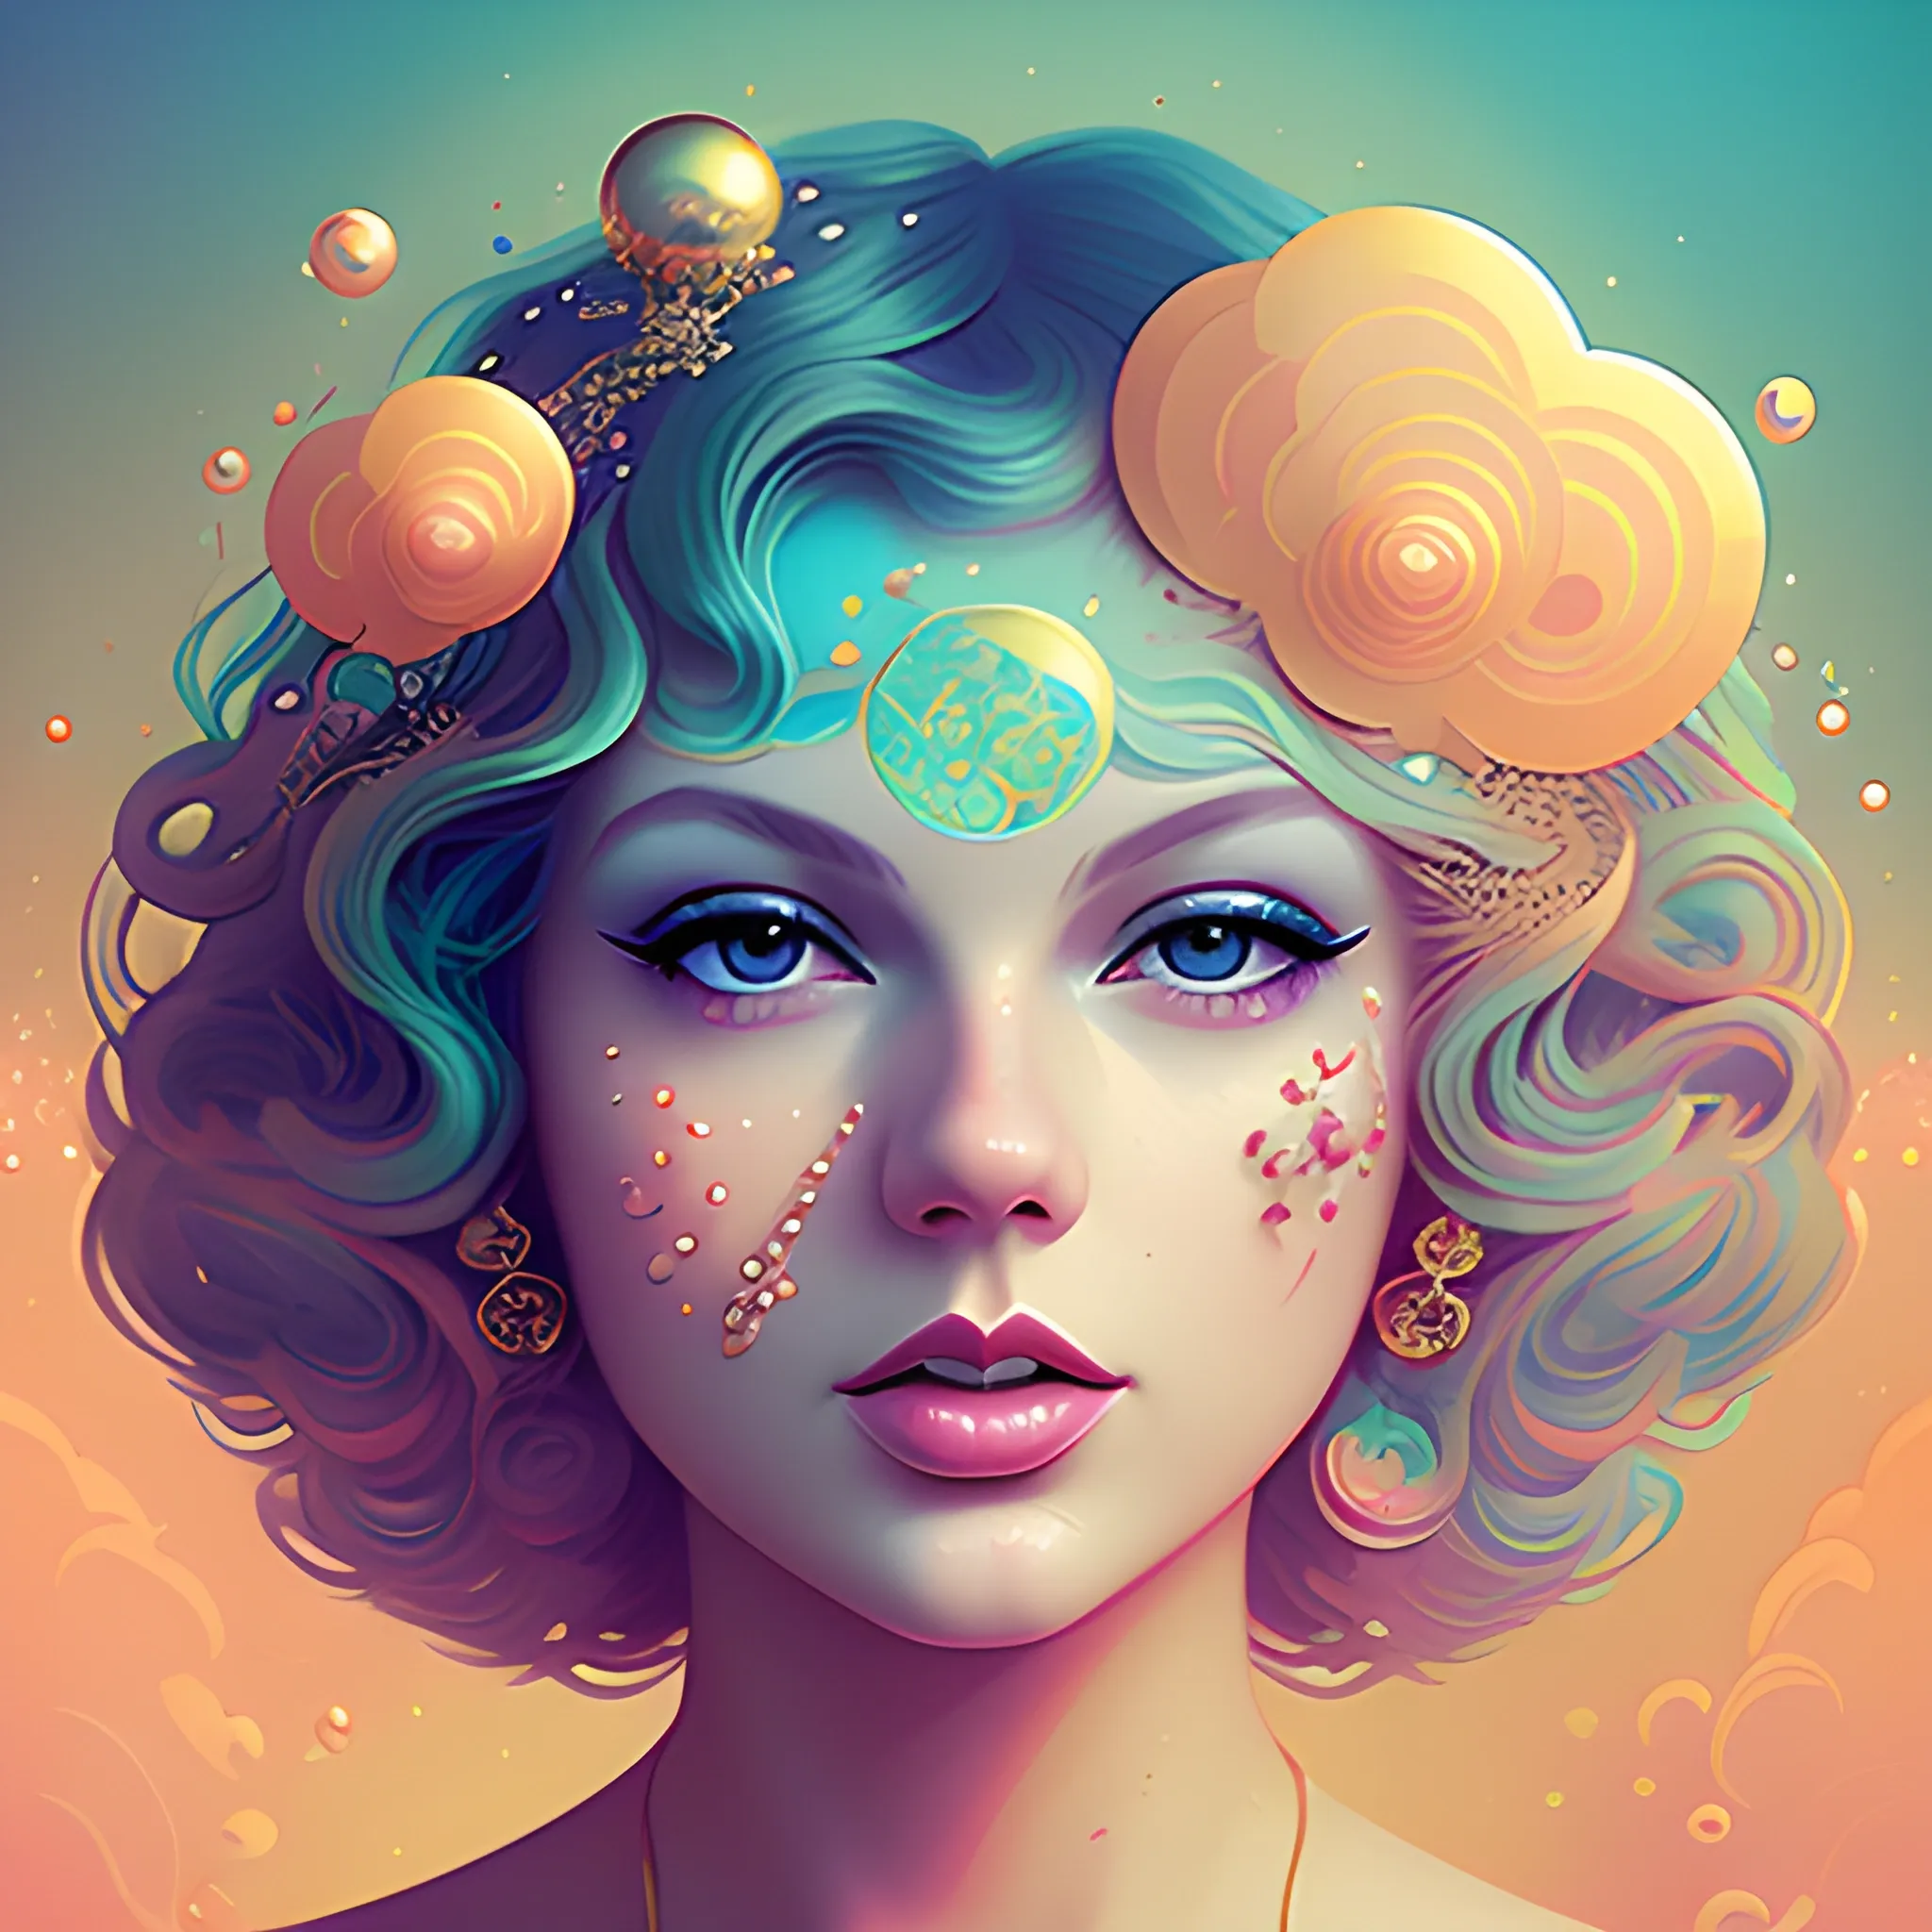 Flowery beautiful face like Taylor swift folklore era with gold jewellery, by petros afshar, ross tran, Tom Bagshaw, tom whalen, underwater bubbly psychedelic clouds, Anaglyph 3D lens blur effect